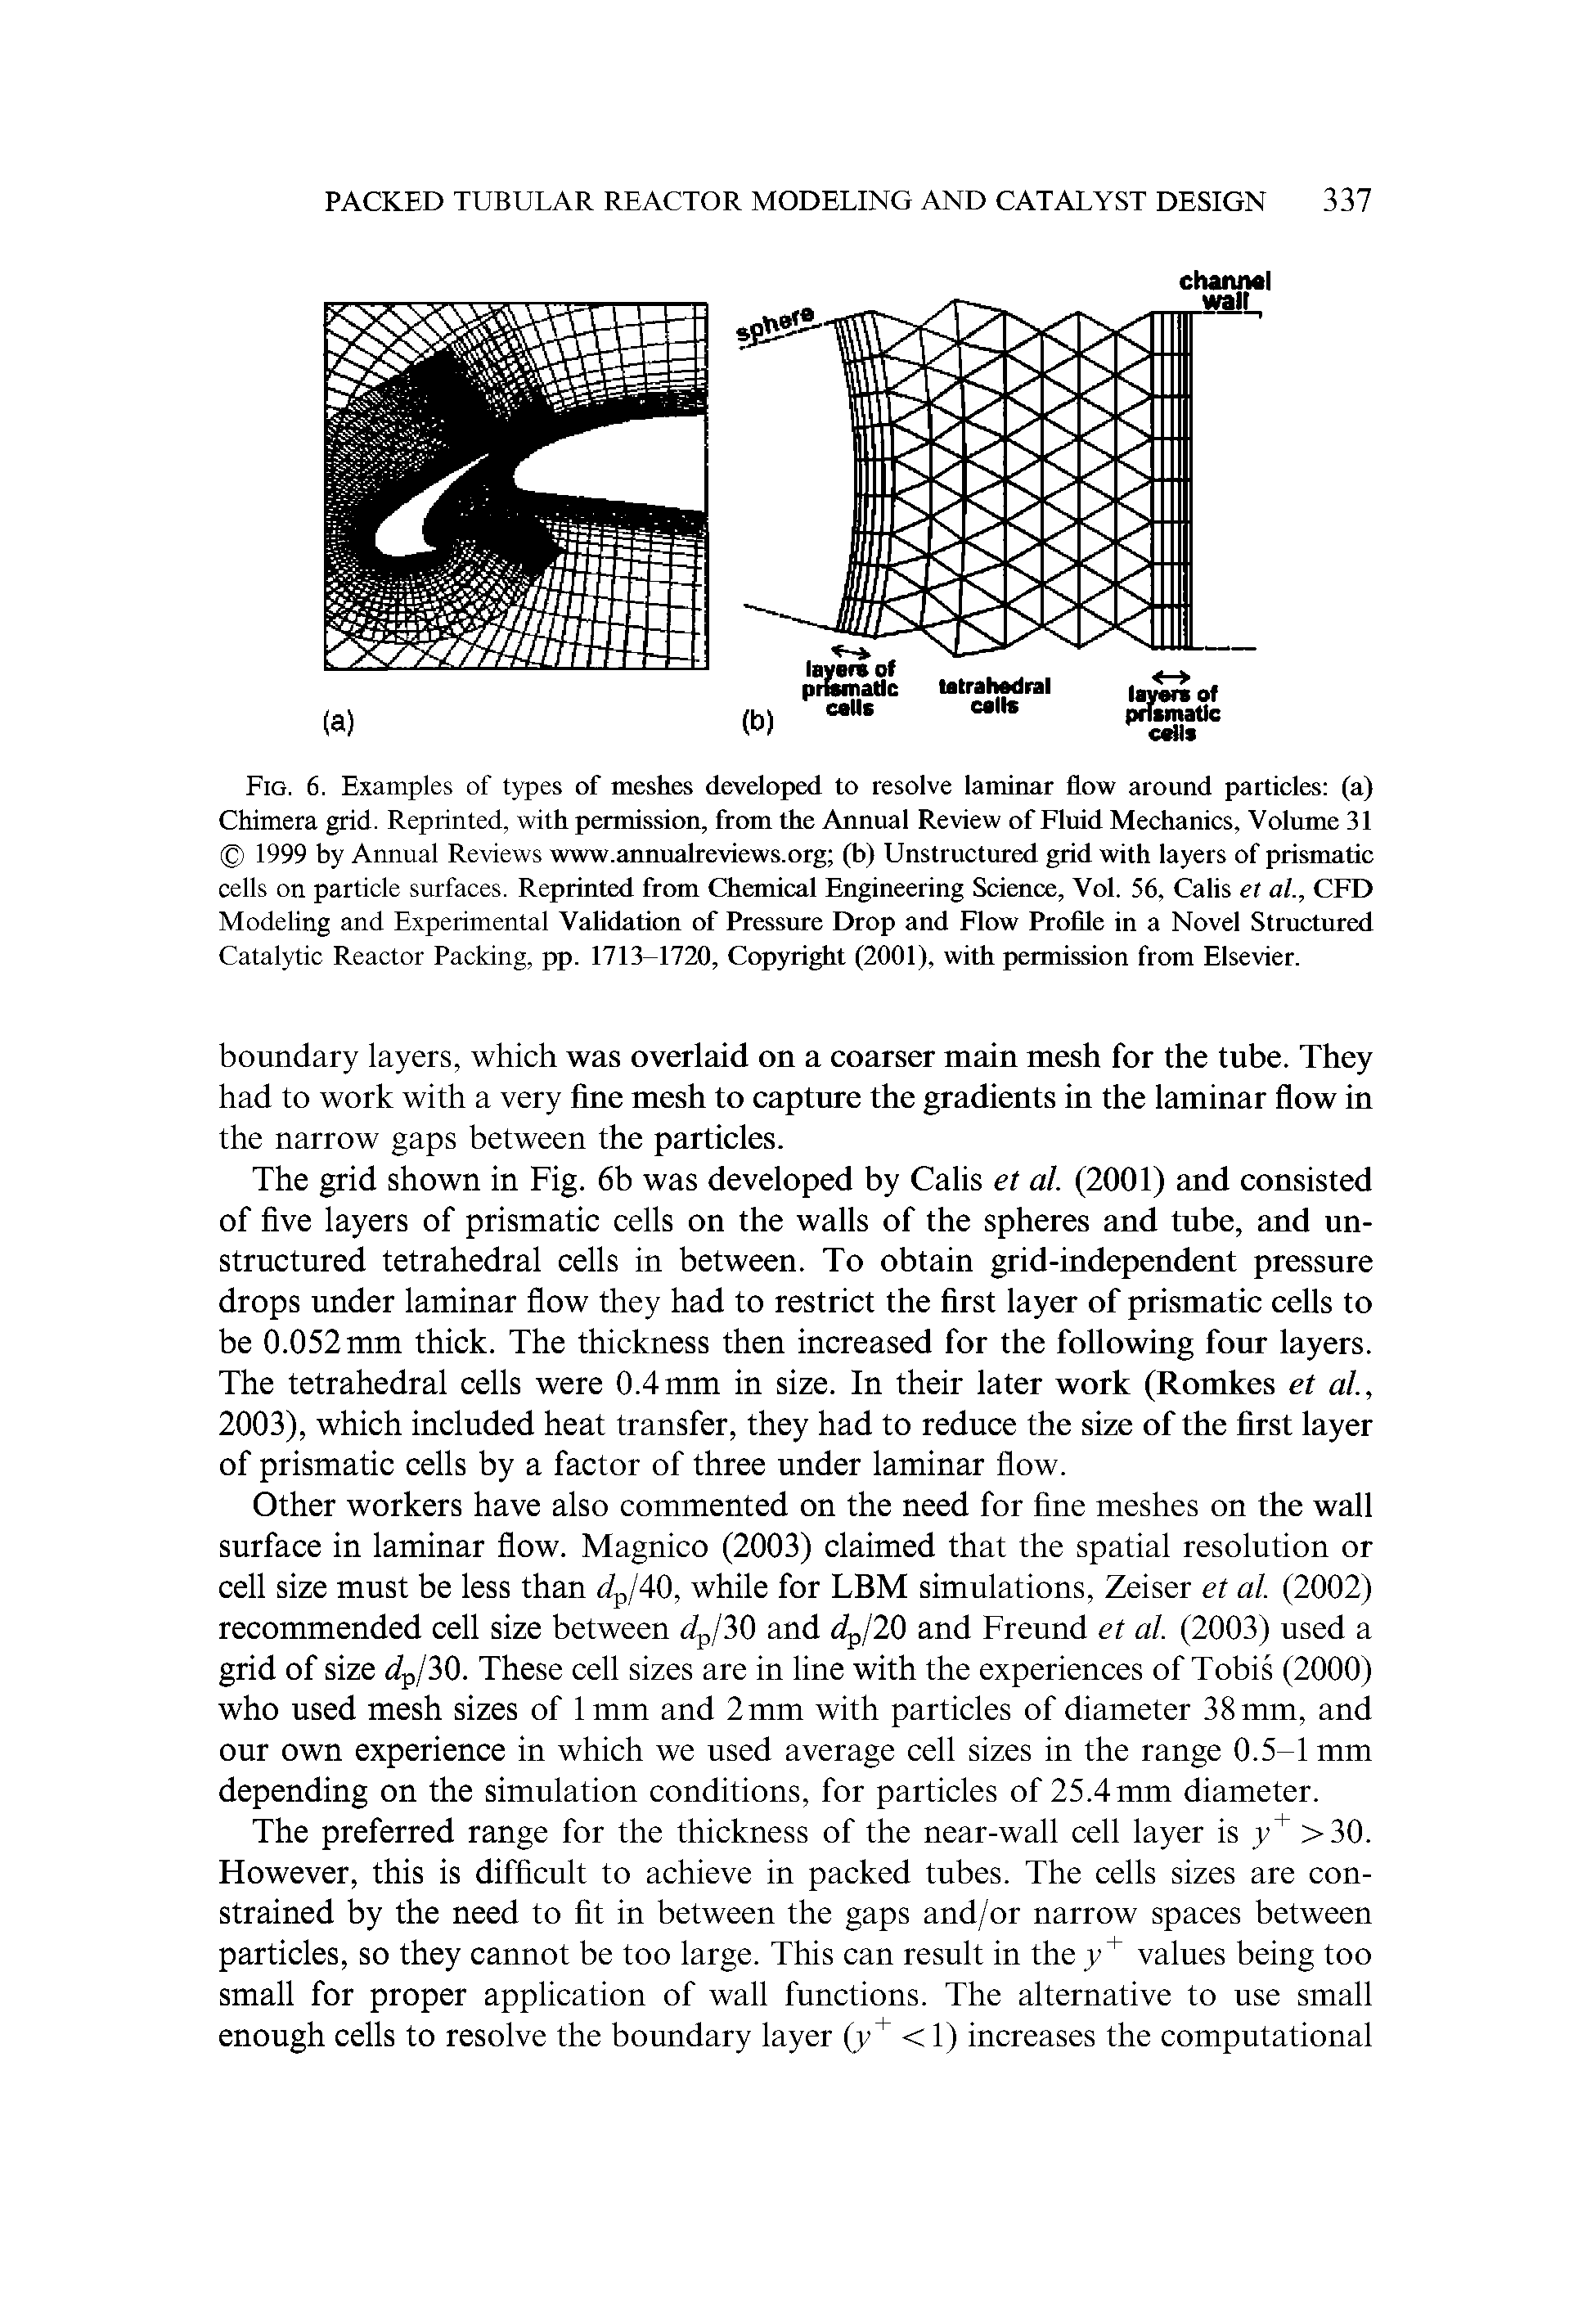 Fig. 6. Examples of types of meshes developed to resolve laminar flow around particles (a) Chimera grid. Reprinted, with permission, from the Annual Review of Fluid Mechanics, Volume 31 1999 by Annual Reviews www.annualreviews.org (b) Unstructured grid with layers of prismatic cells on particle surfaces. Reprinted from Chemical Engineering Science, Vol. 56, Calis et al., CFD Modeling and Experimental Validation of Pressure Drop and Flow Profile in a Novel Structured Catalytic Reactor Packing, pp. 1713-1720, Copyright (2001), with permission from Elsevier.